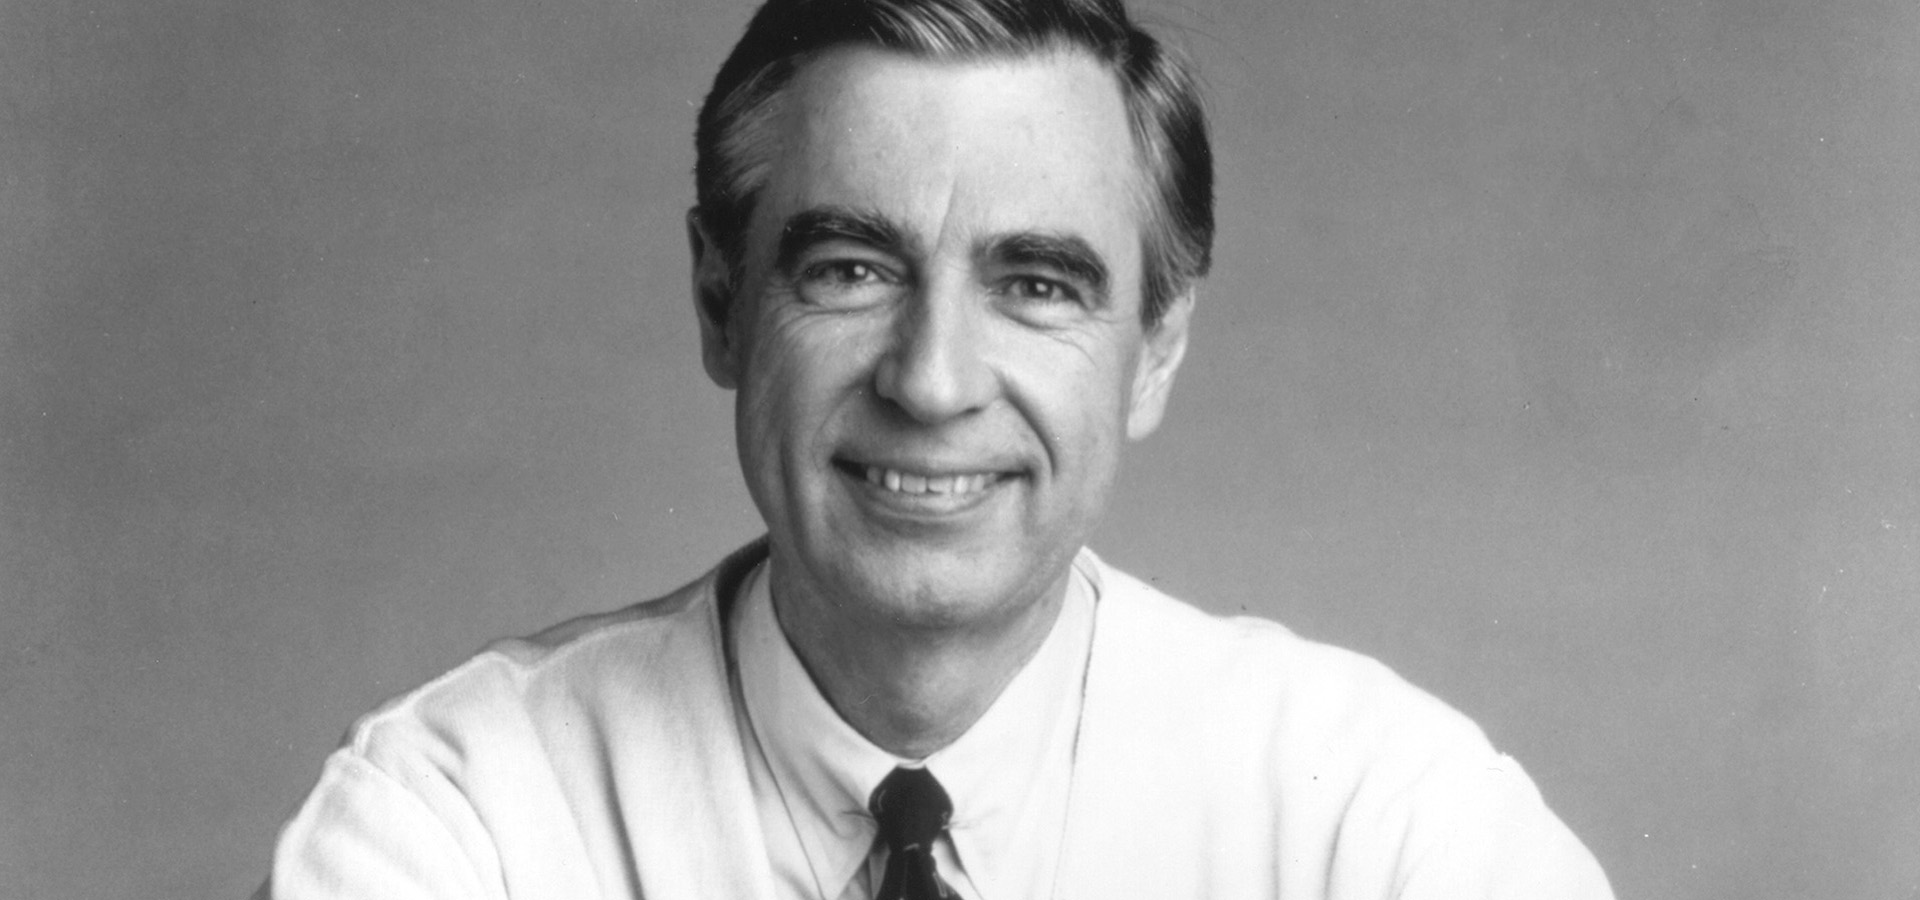 Fred Rogers The Host Of The Children's Television Series Mr Rogers' Neighborhood